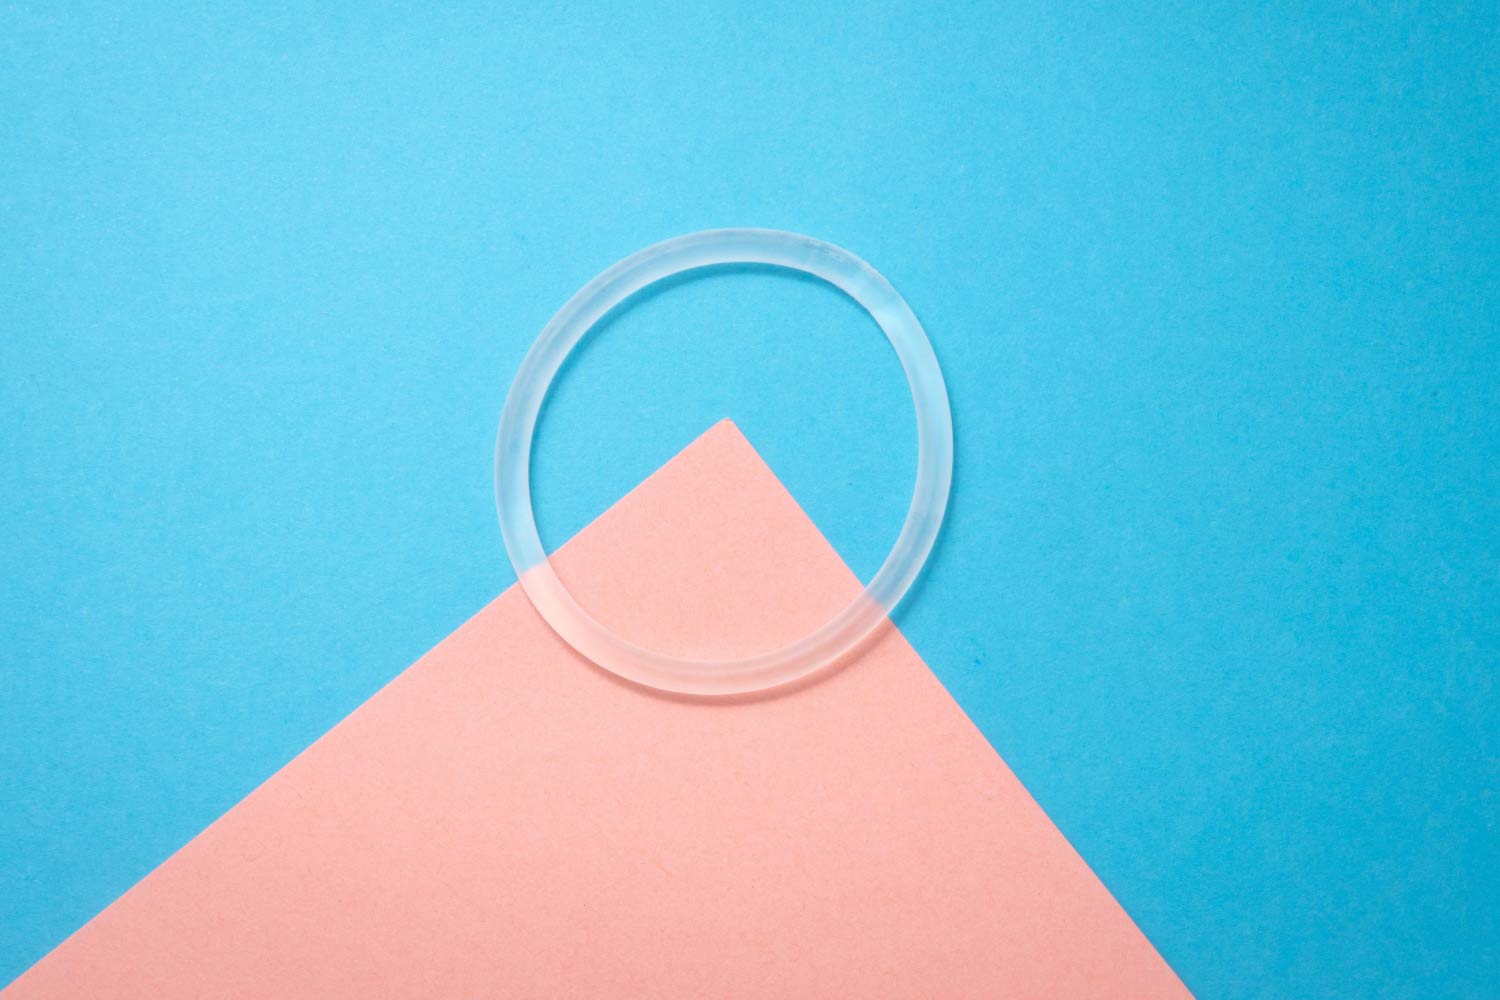 Vagina care - The birth control vagina ring is a small, flexible, plastic  ring that is inserted into the vagina to prevent pregnancy. The vagina ring  is a prescription-only method of birth